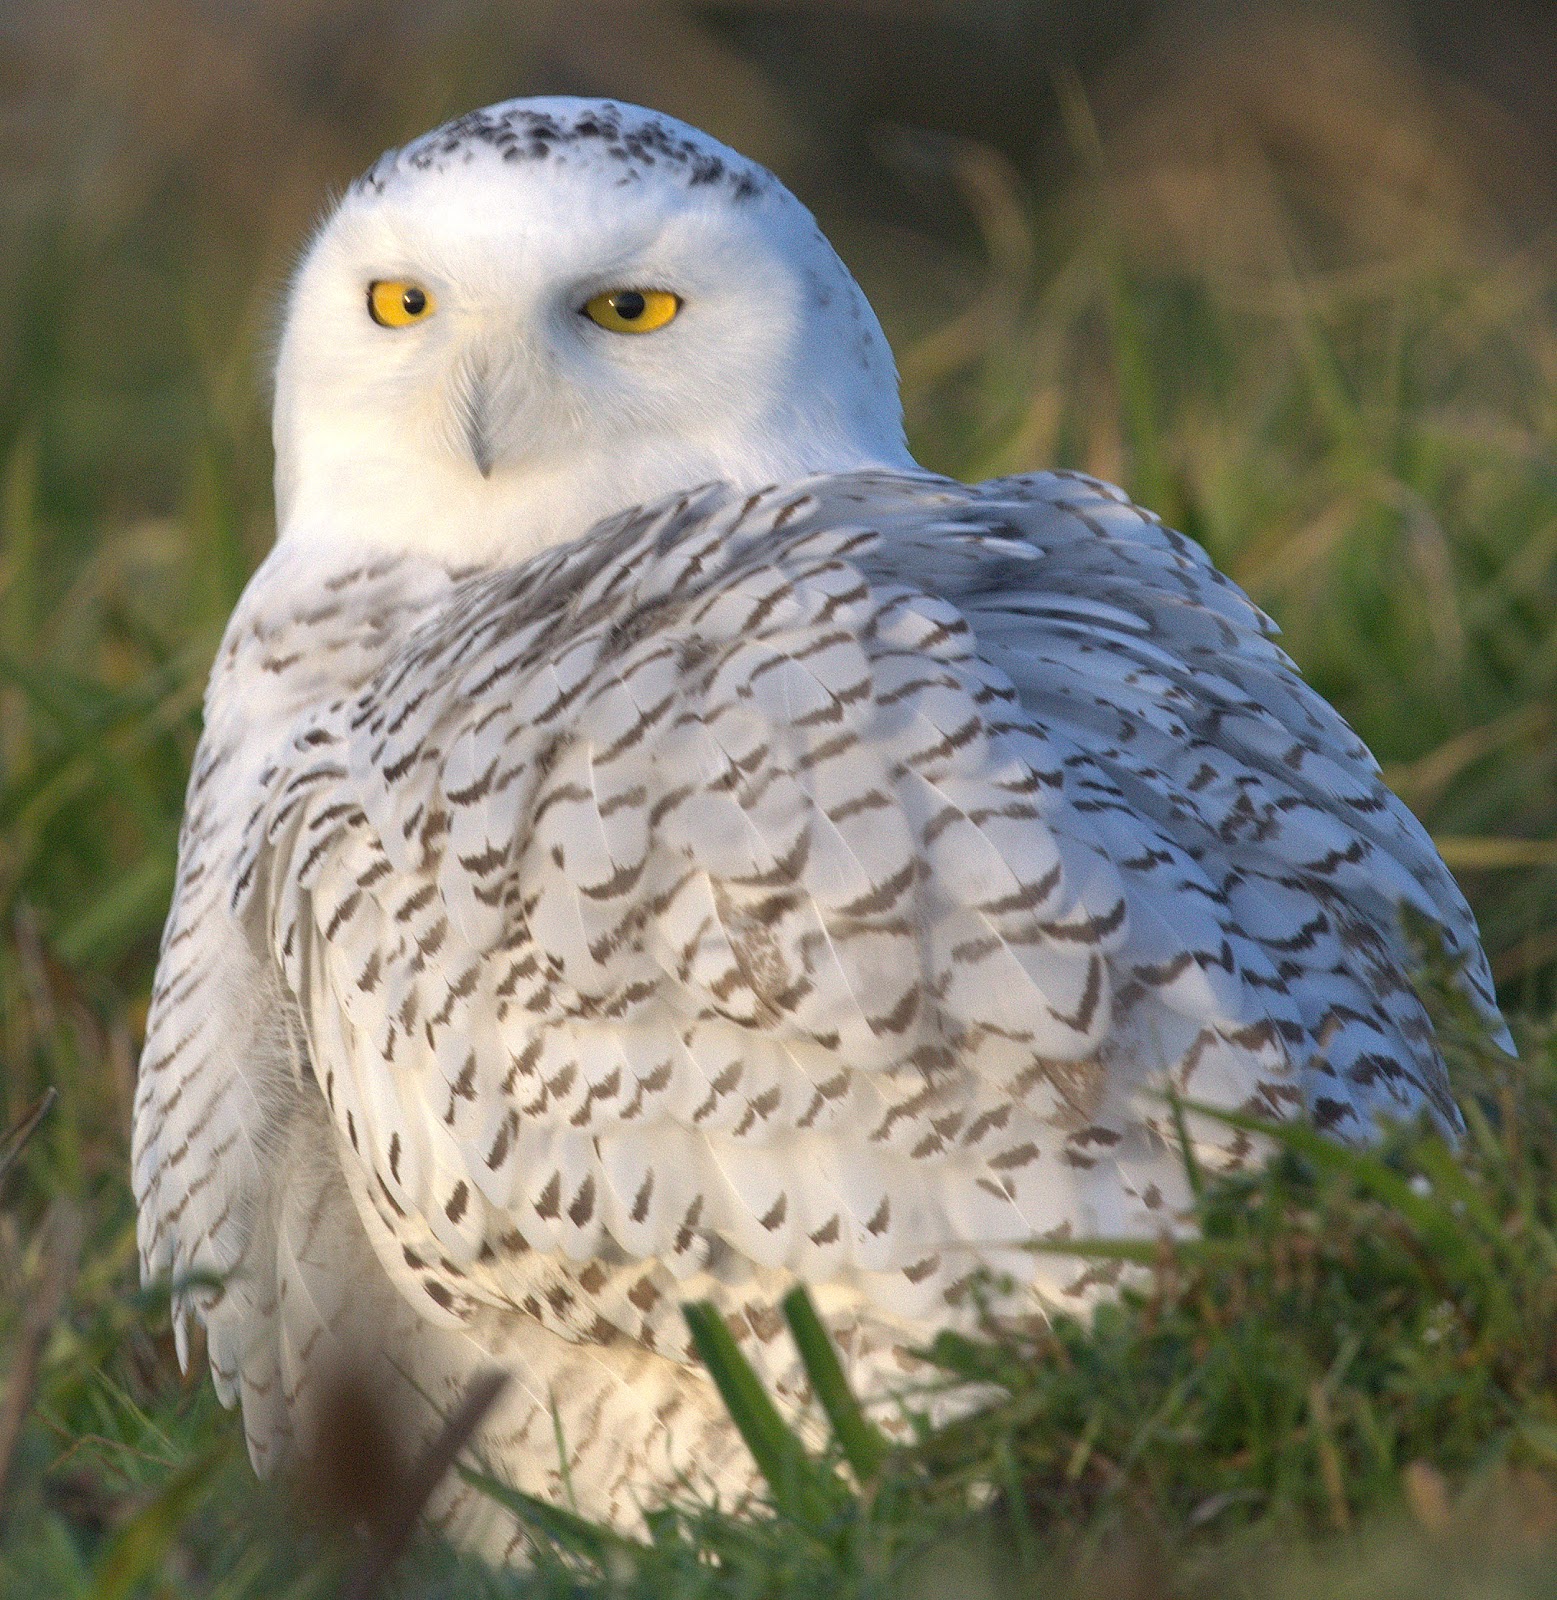 clearlyconfused: Snowy Owl Irruption at Thanksgiving!